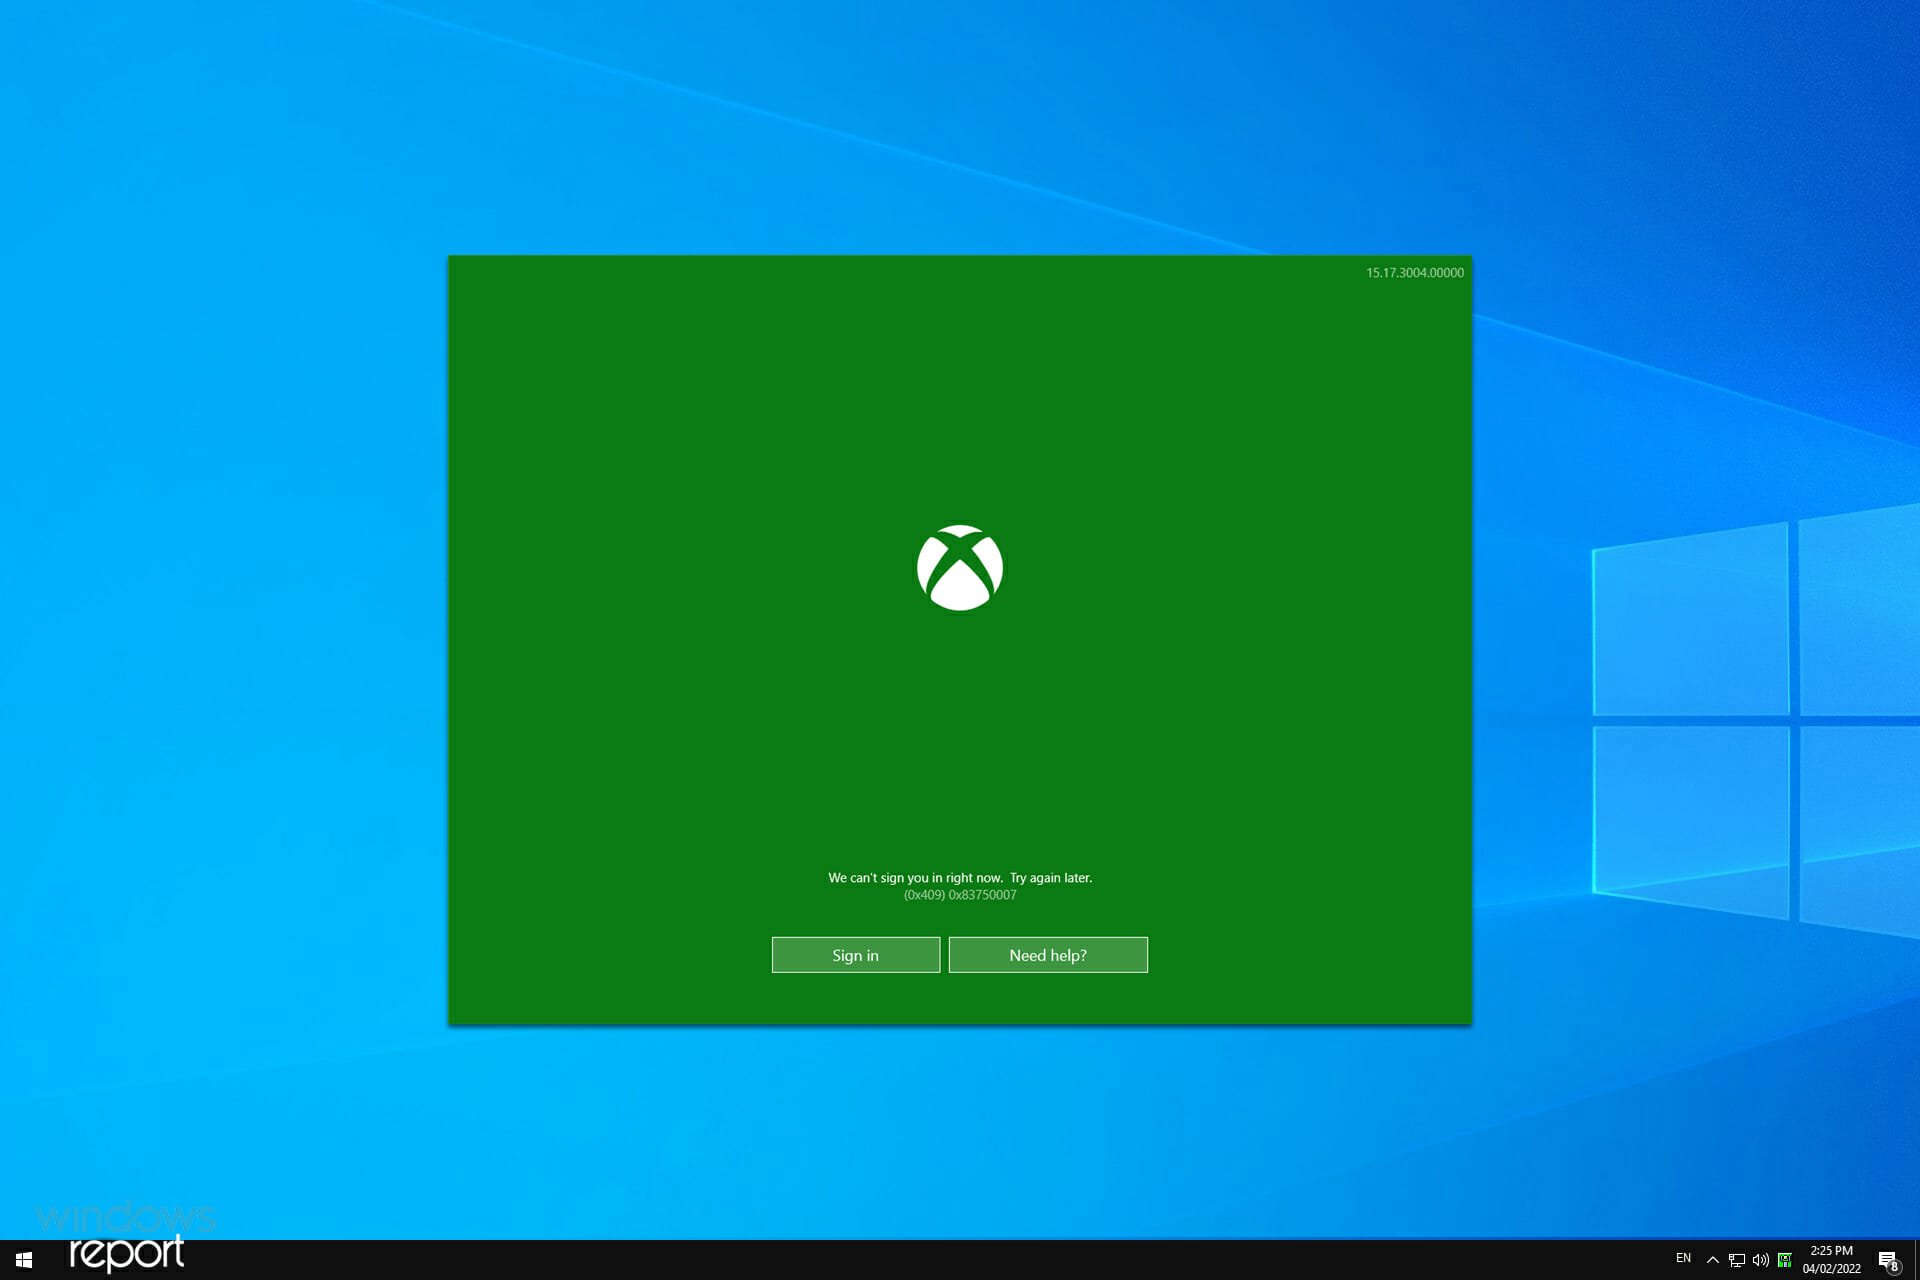 Humanistisch Definitie reservering Xbox App Can't Sign In: How to Fix and Easily Sign In